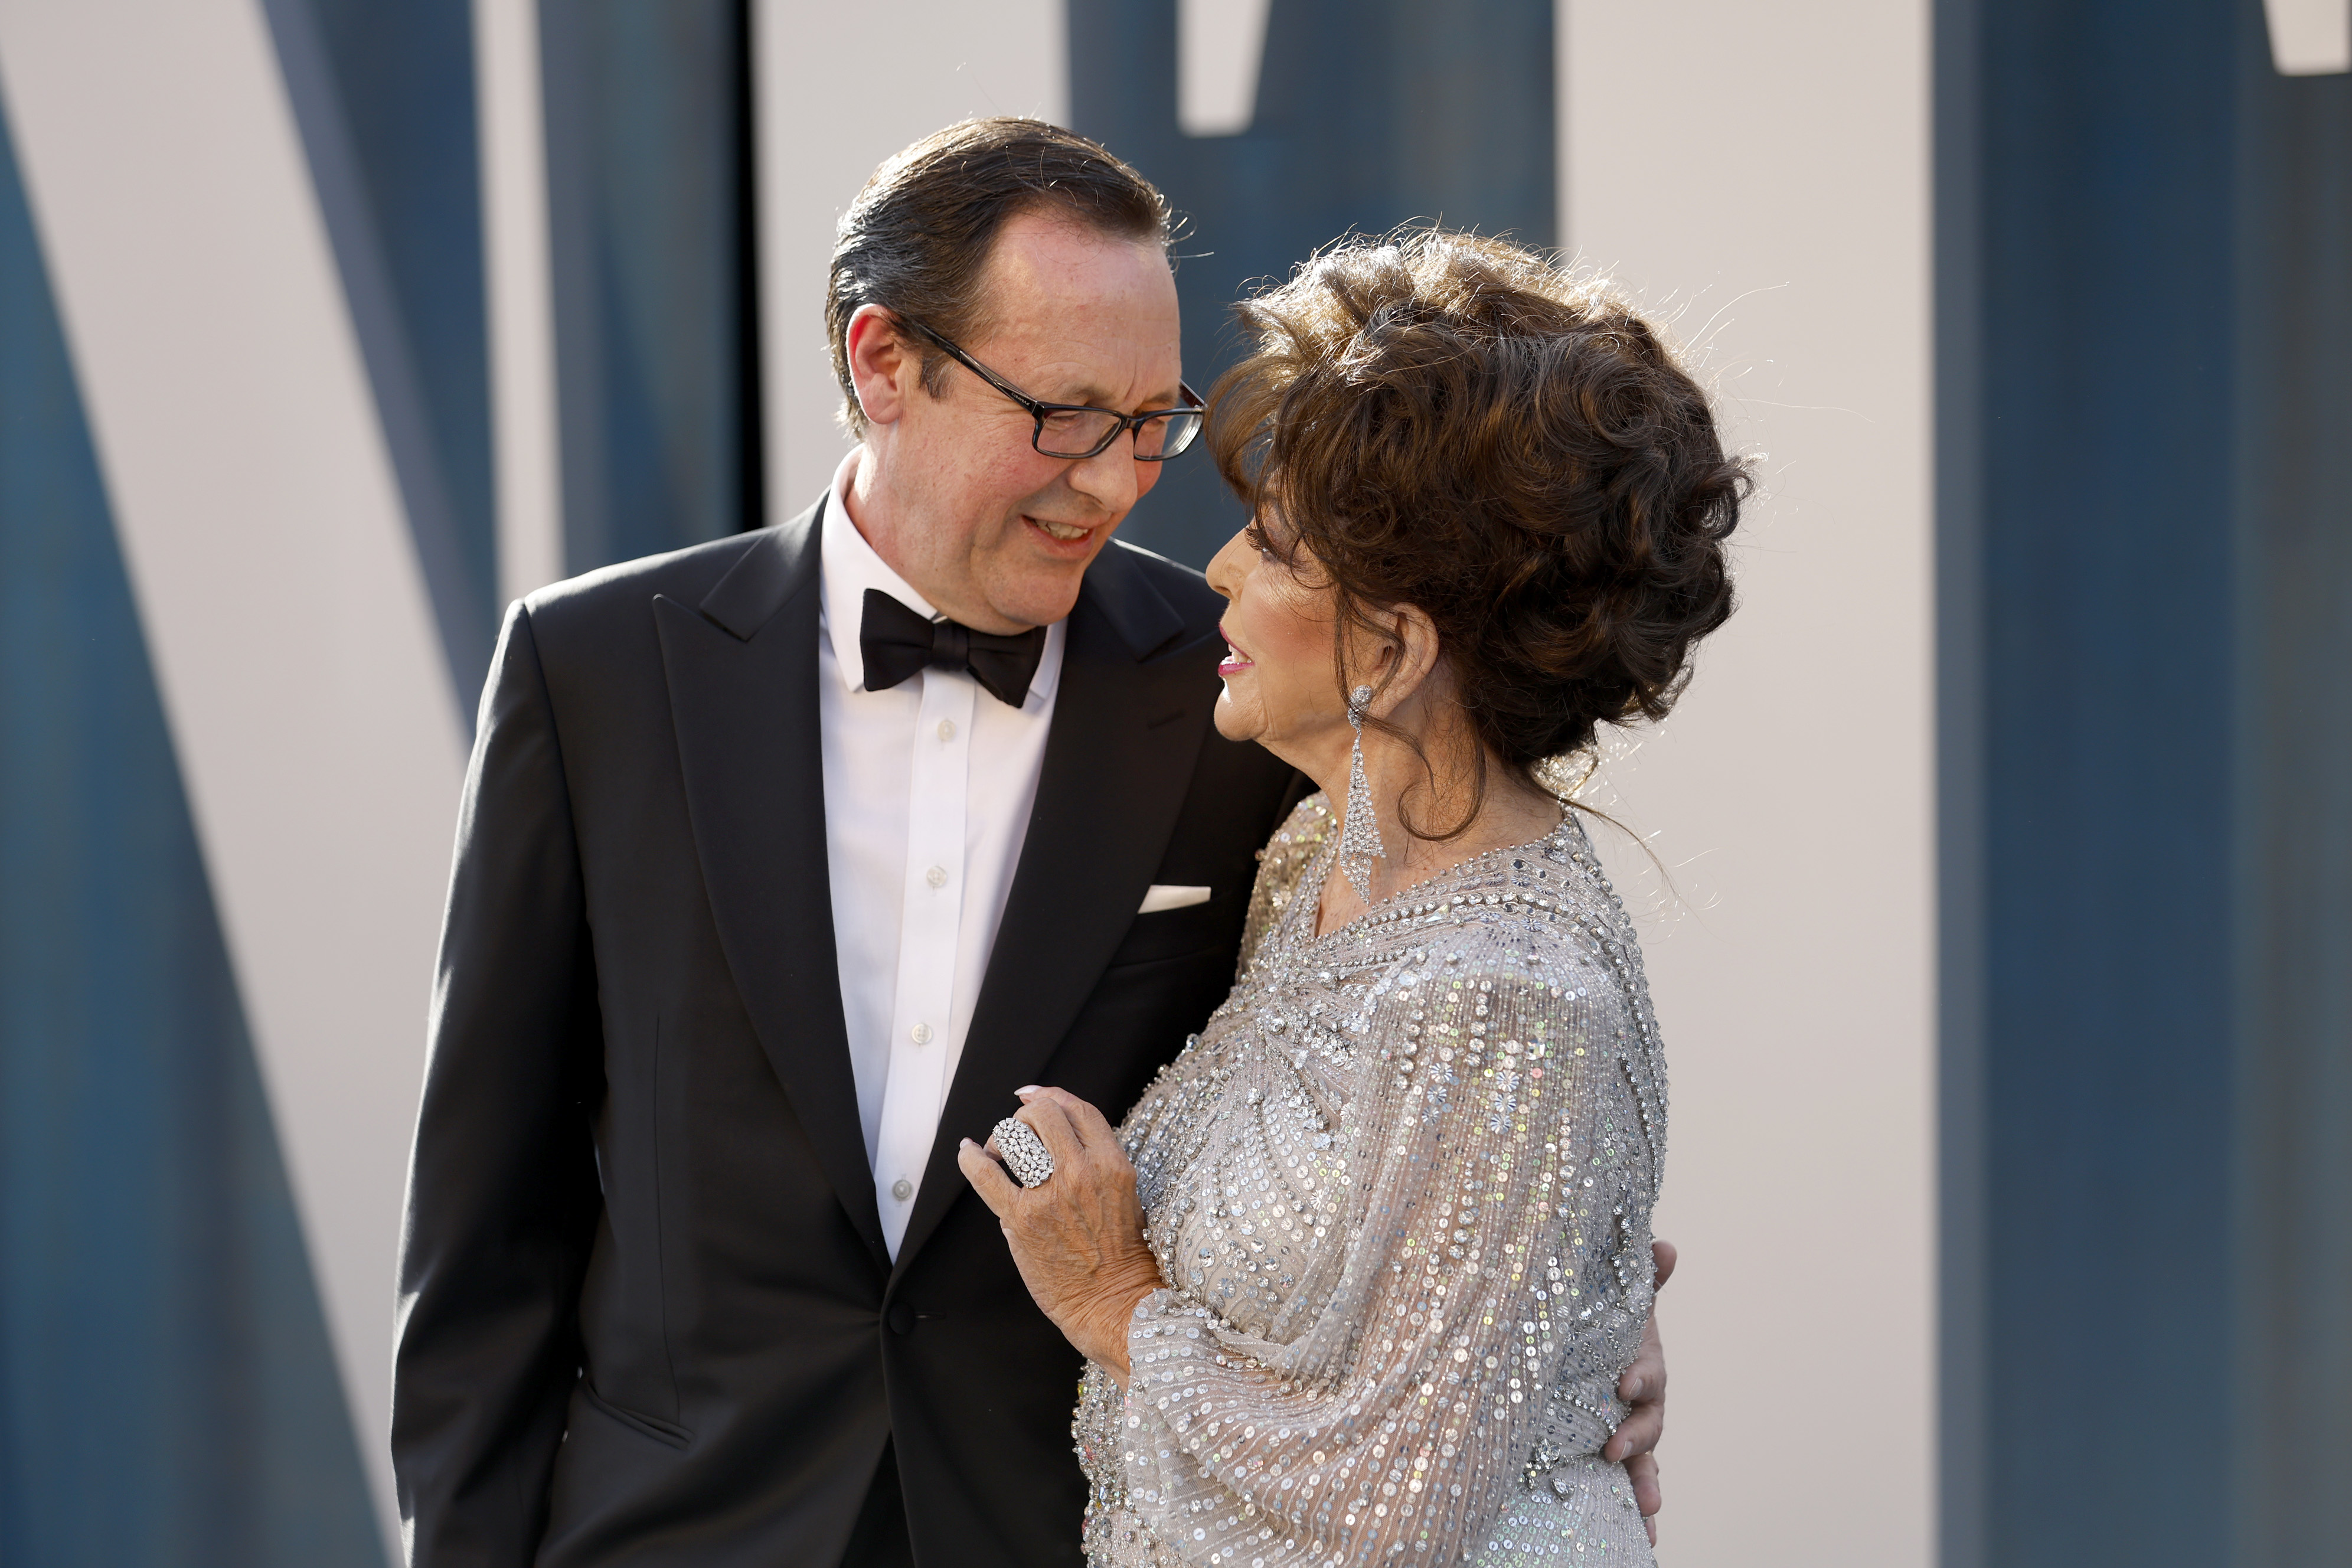 Percy Gibson and Joan Collins at the 2022 Vanity Fair Oscar Party at Wallis Annenberg Center for the Performing Arts on March 27, 2022 in Beverly Hills, California. | Sources: Getty Images